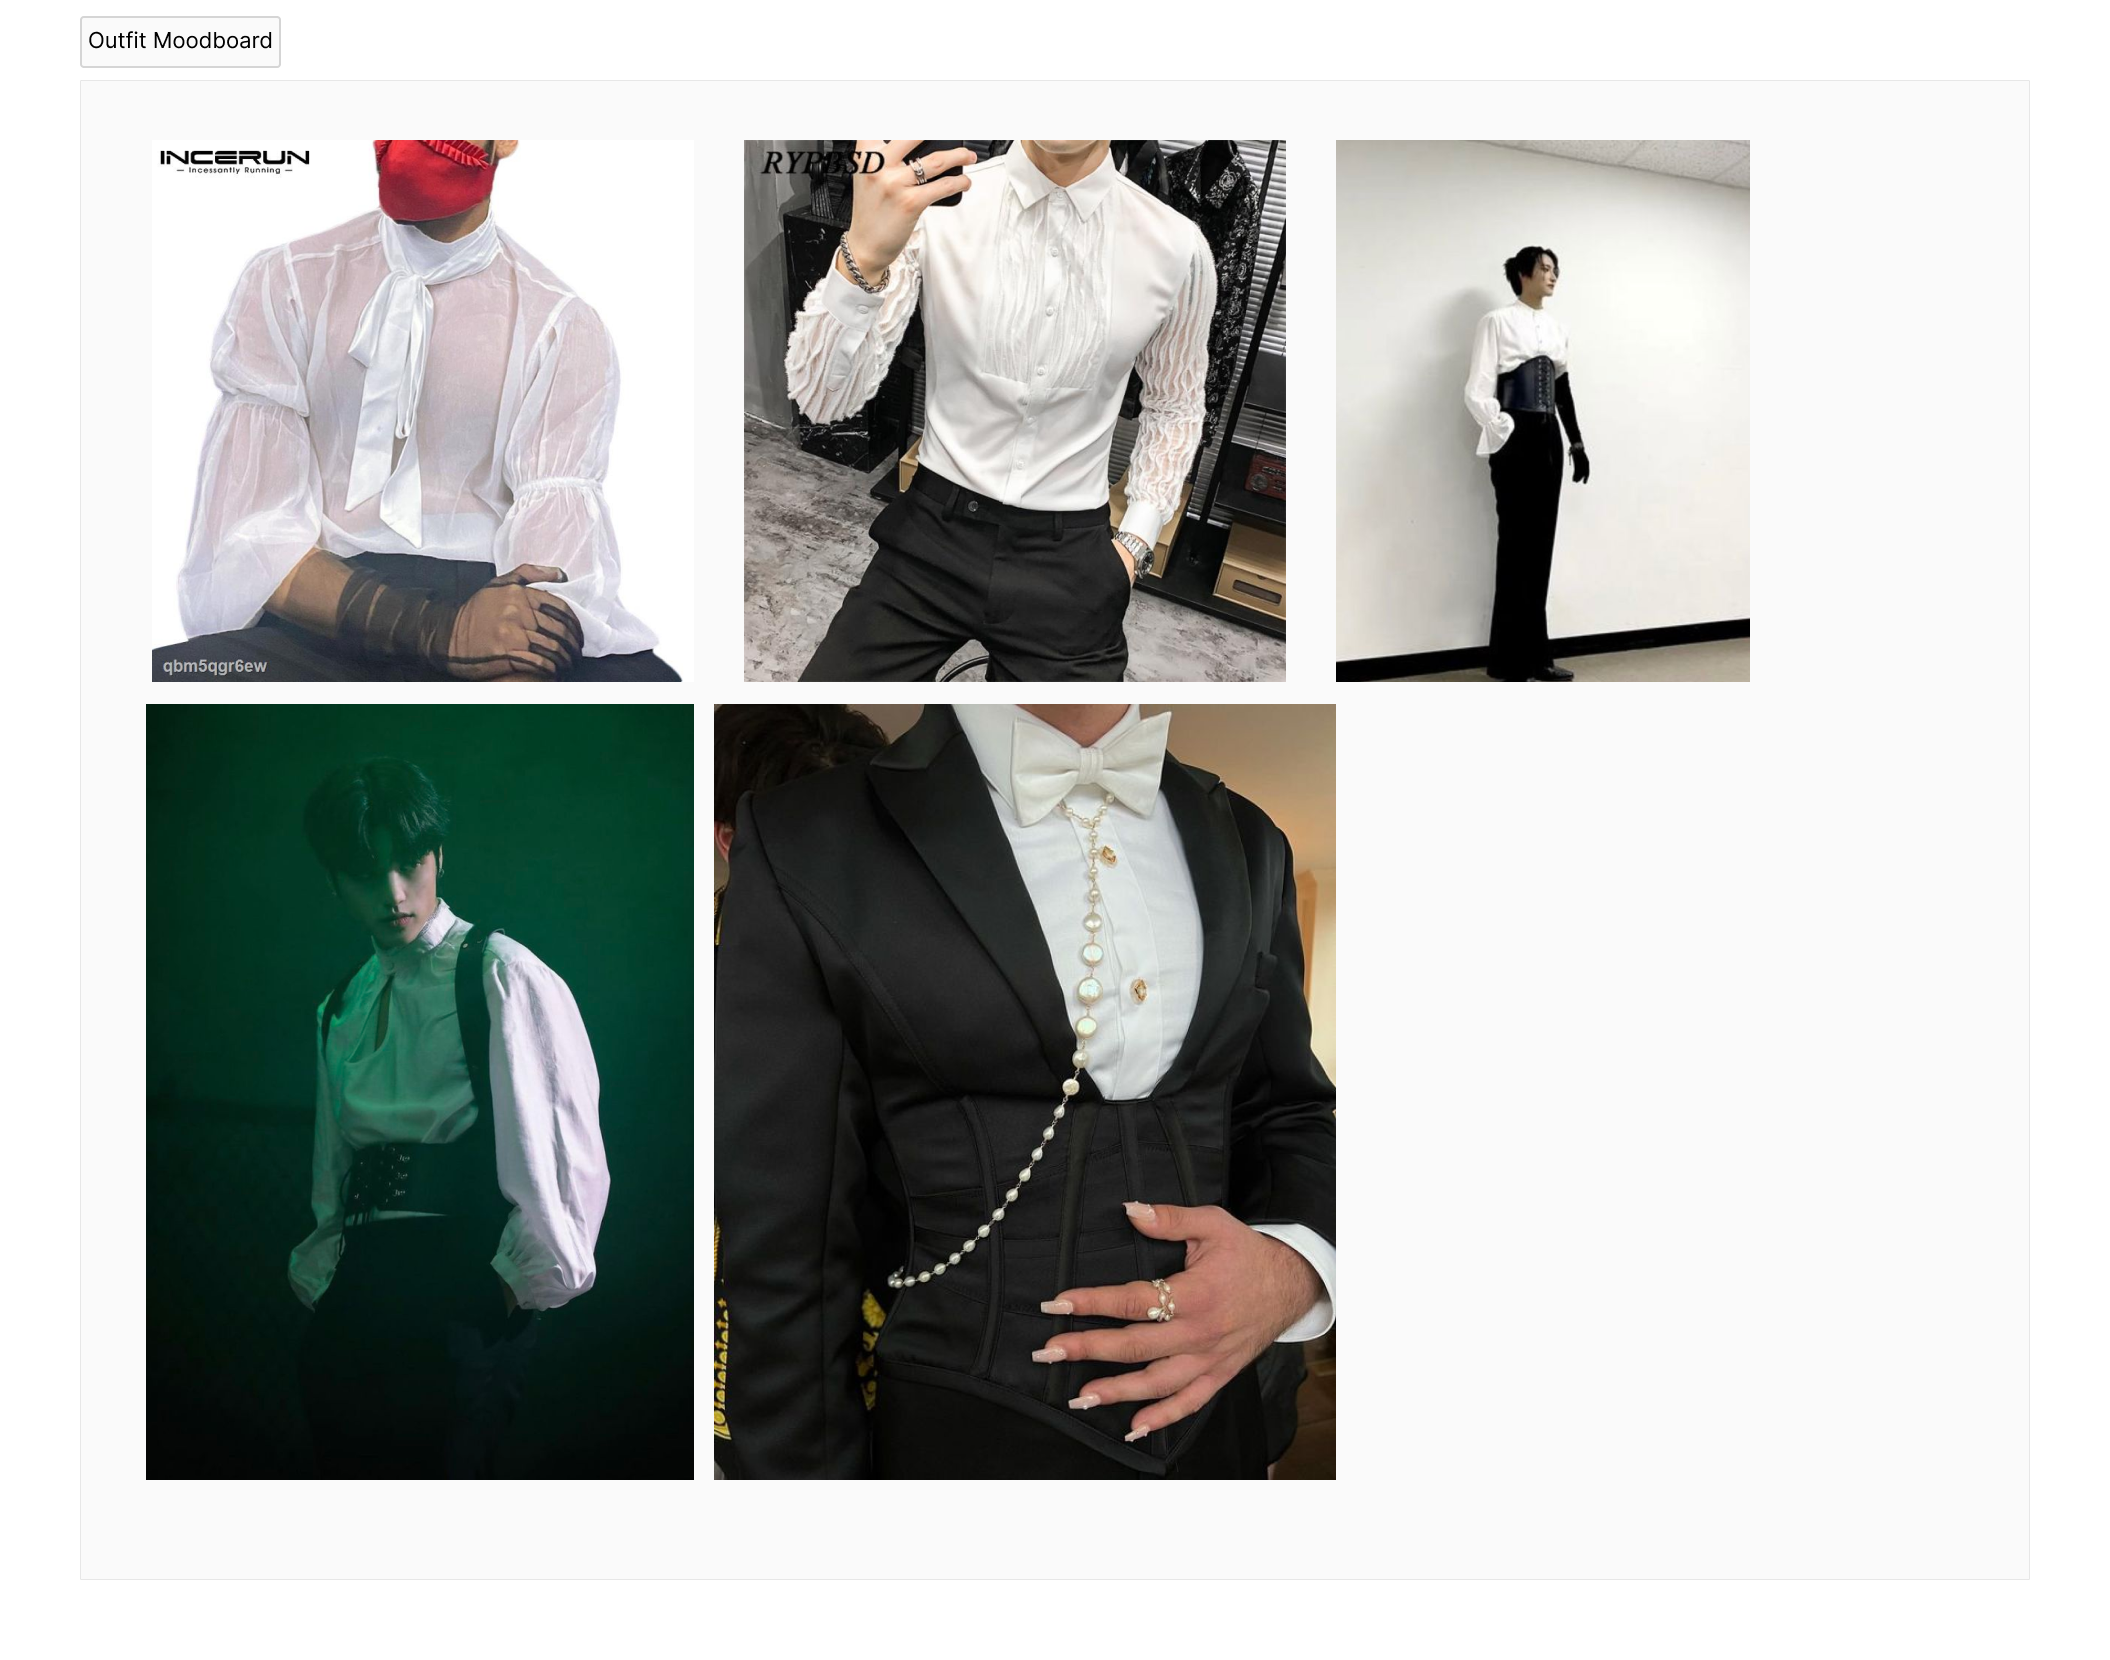 My second moodboard, consisting of different black and white outfits with corsets, see-through shirts, and pearls